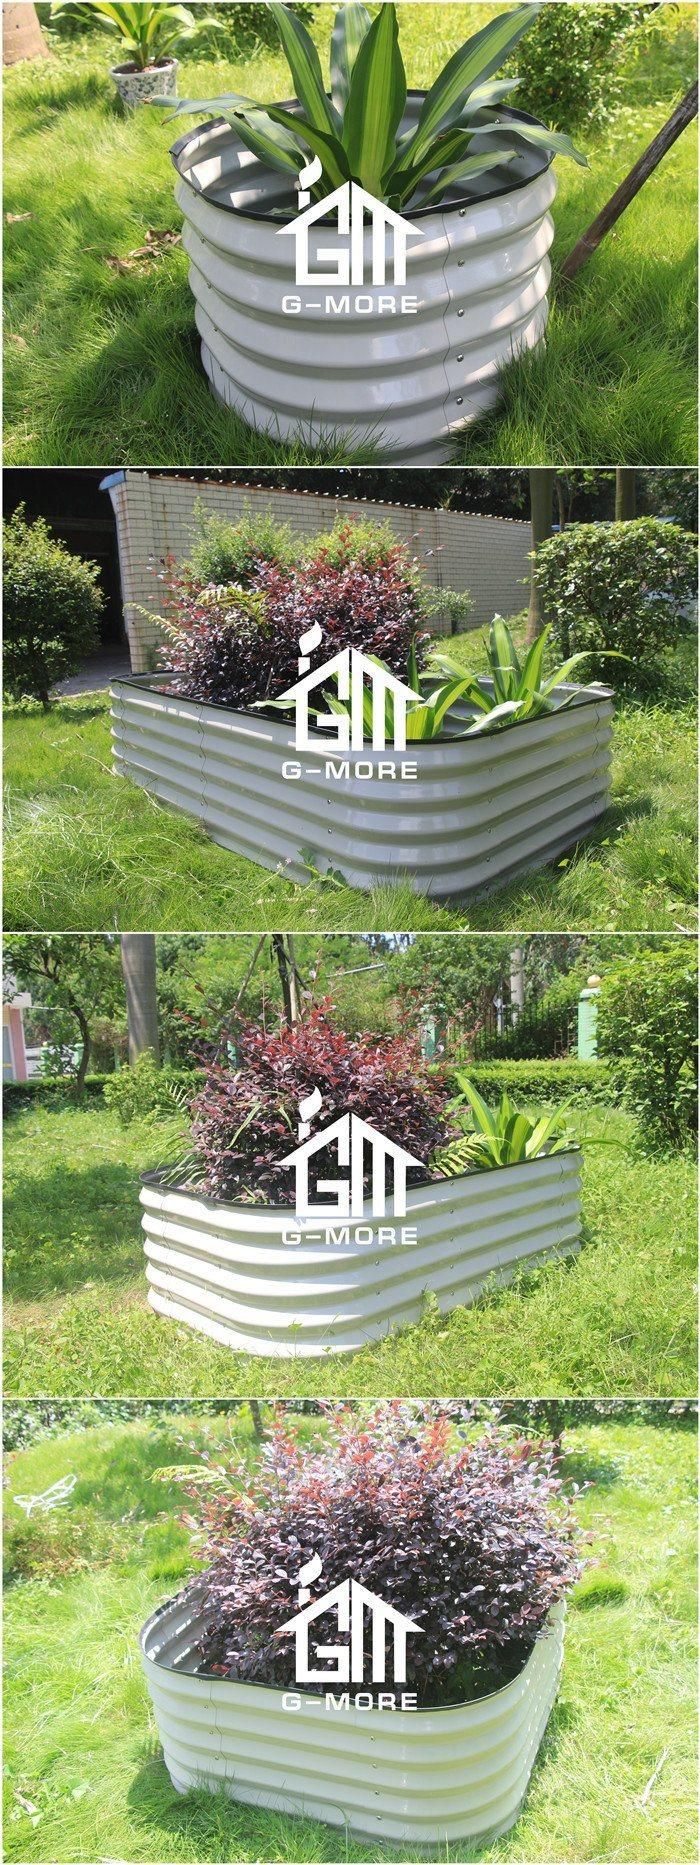 90X150X44cm Outdoor Steel Raised Garden Bed Sliver/Ivory Raised Seed Beds